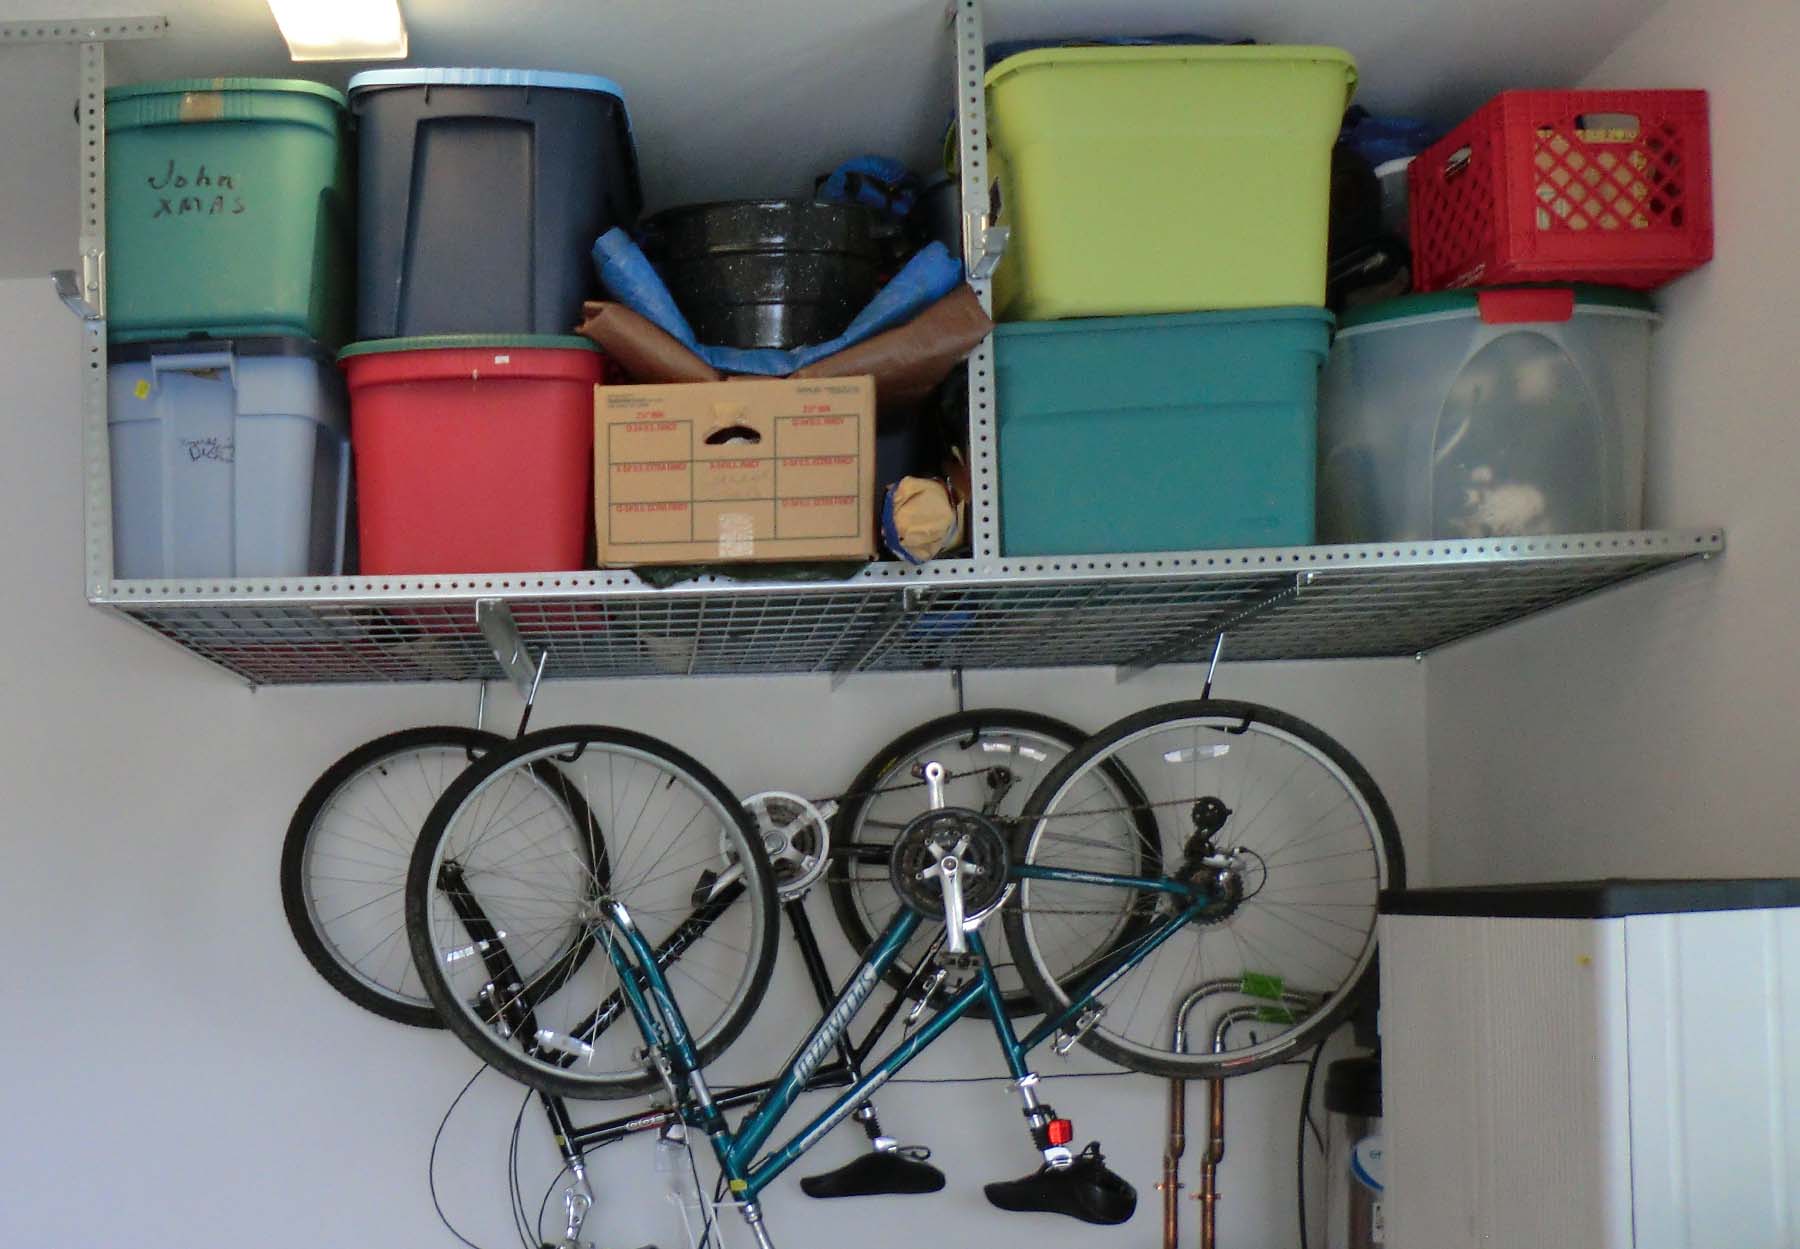 Garage Storage Organization Let's You Put Rarely Used Items Up Out Of The Way